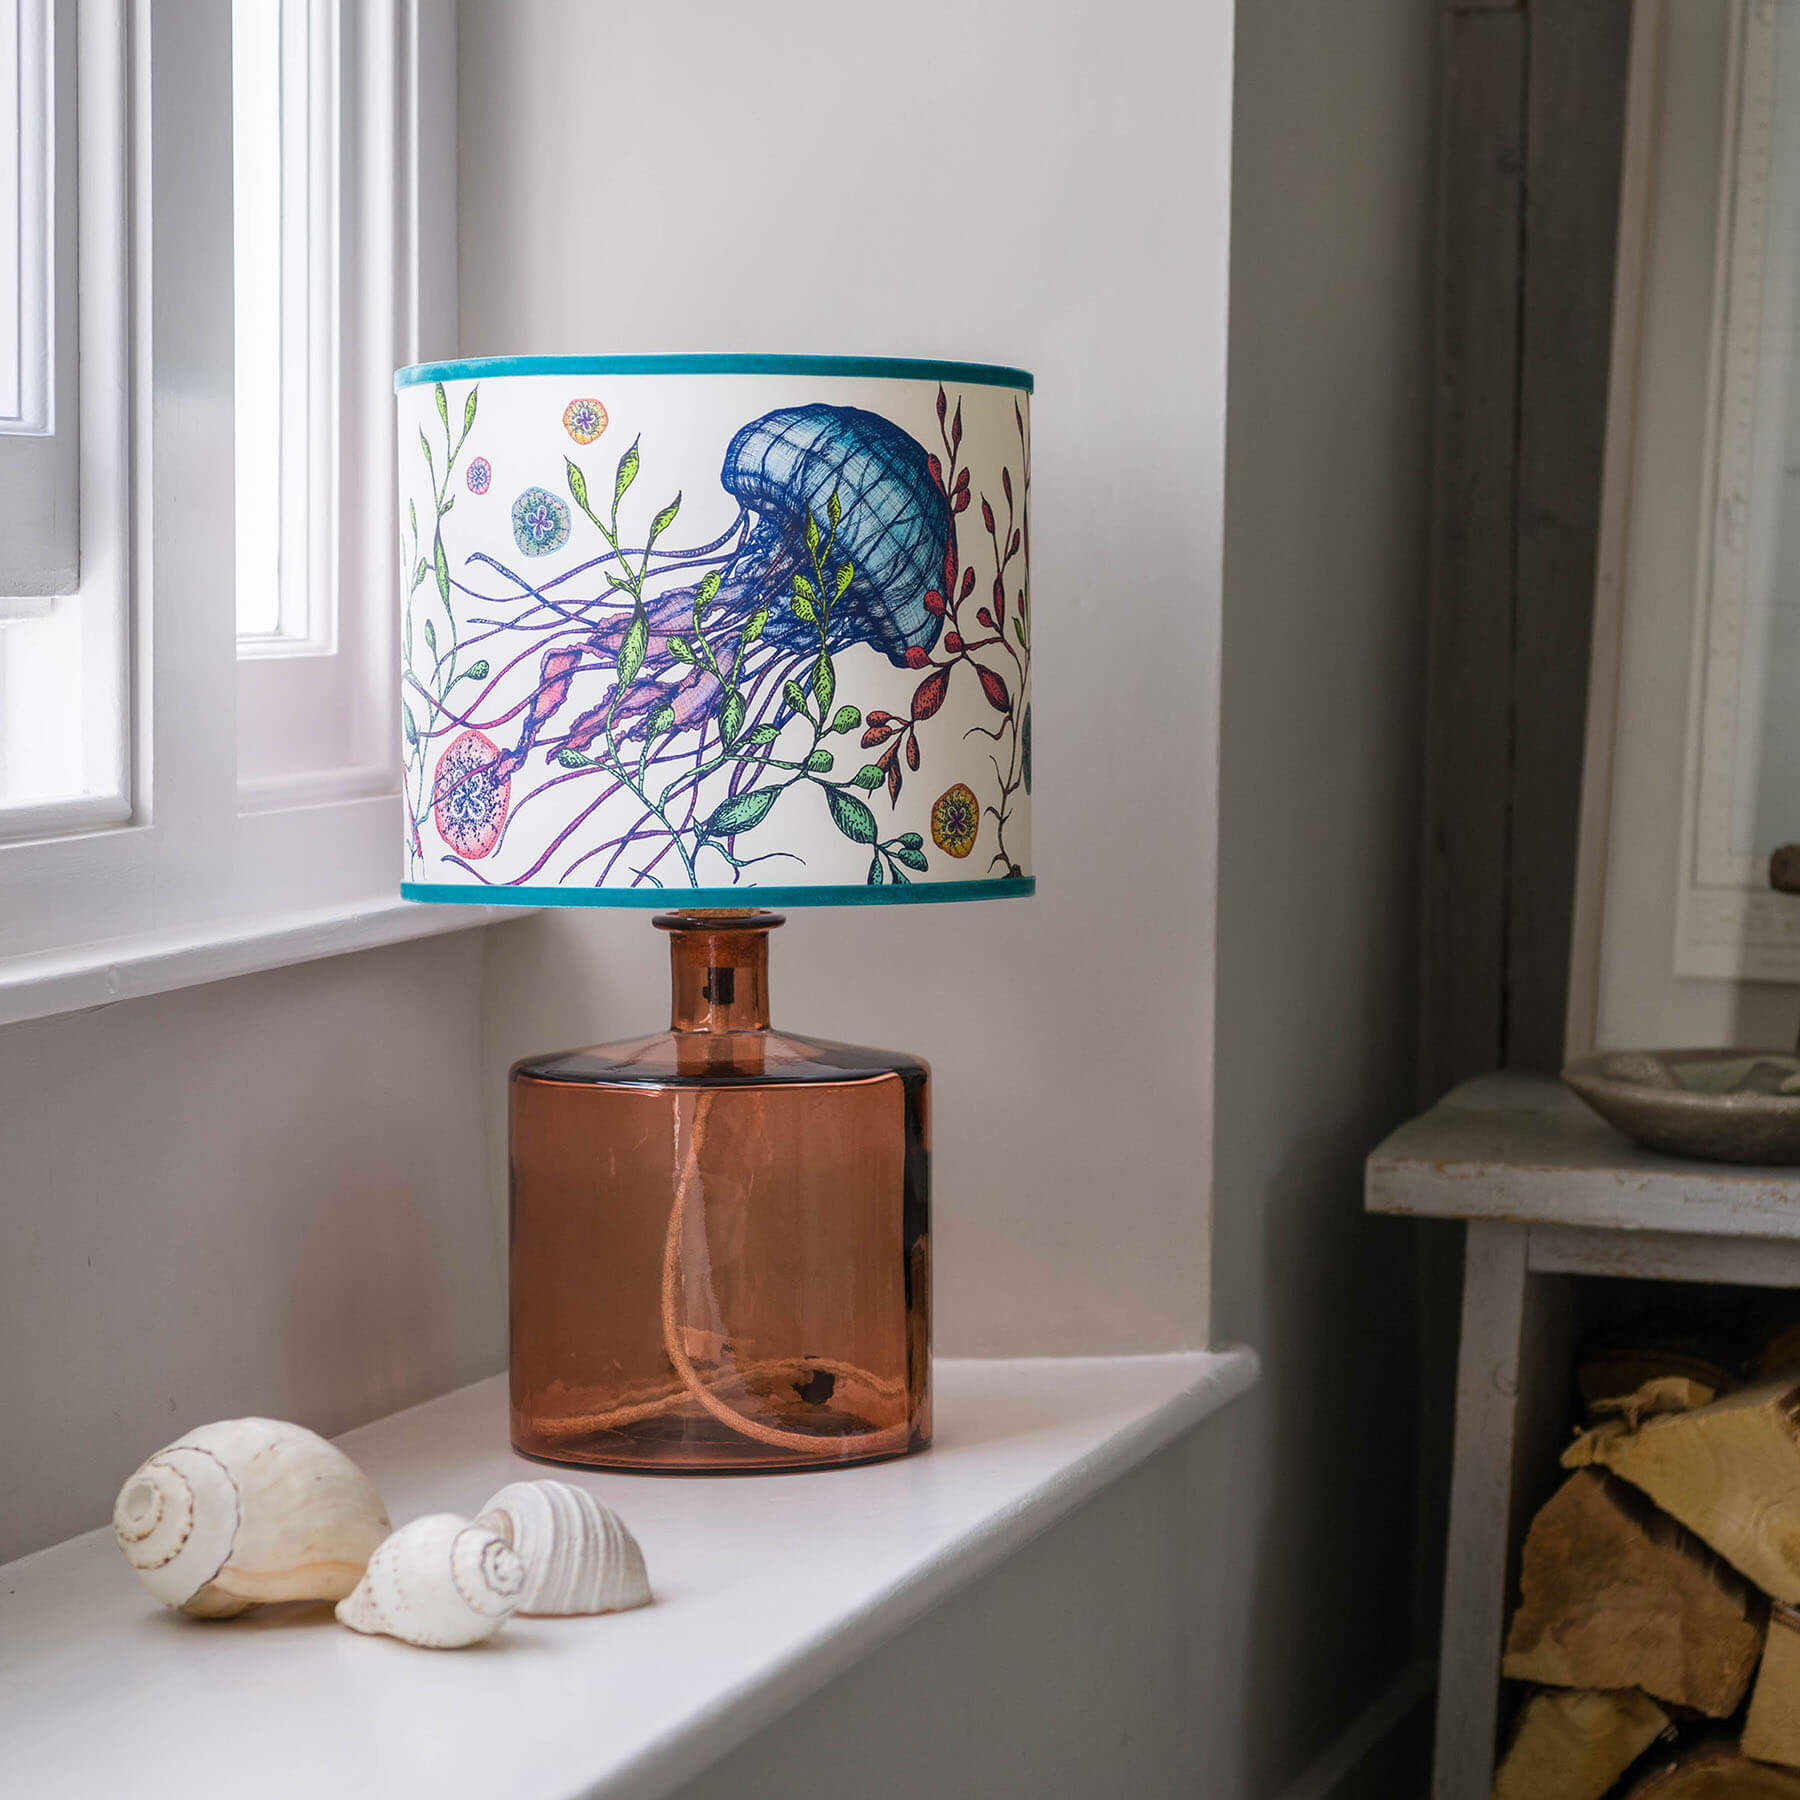 Canyons Reef White Shade With Jellyfish Design in bright colours on a pink glass lampbase placed on a window ledge.Next to the window is a table with firewood in.